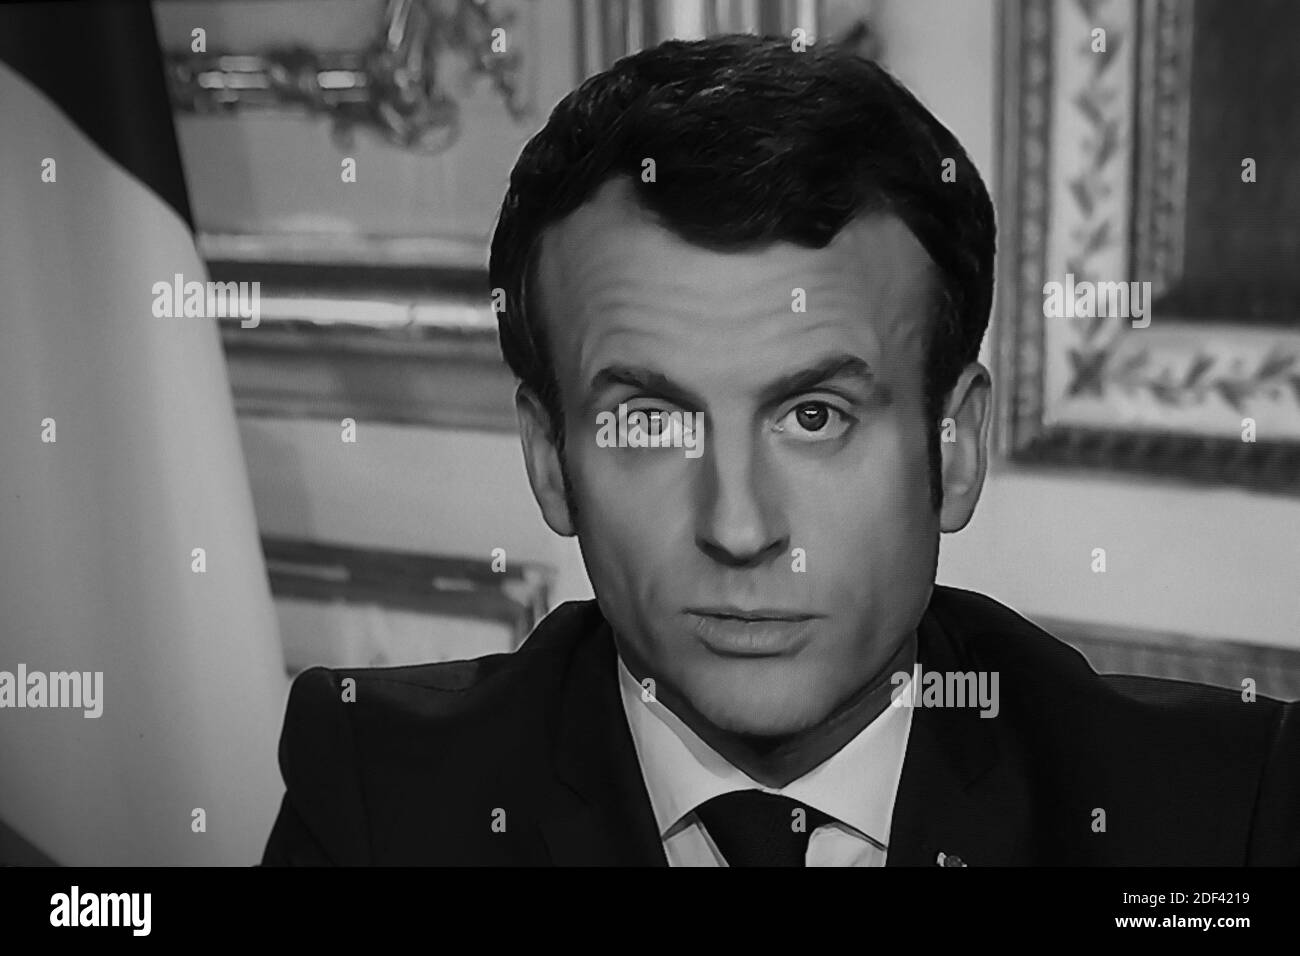 Emmanuel Macron is seen on a television screen as he speaks during a televised address to the nation on the outbreak of COVID-19, caused by the novel coronavirus in Paris, France on March 16, 2020. President Macron has said France is in a state of war against the coronavirus in a televised address, he forbade people from leaving home, except for essential reasons.The French president addresses the nation, with many expecting him to unveil more strict home confinement rules in a bid to prevent the virus from spreading. France has closed down all schools, theatres, cinemas and a range of shops, Stock Photo